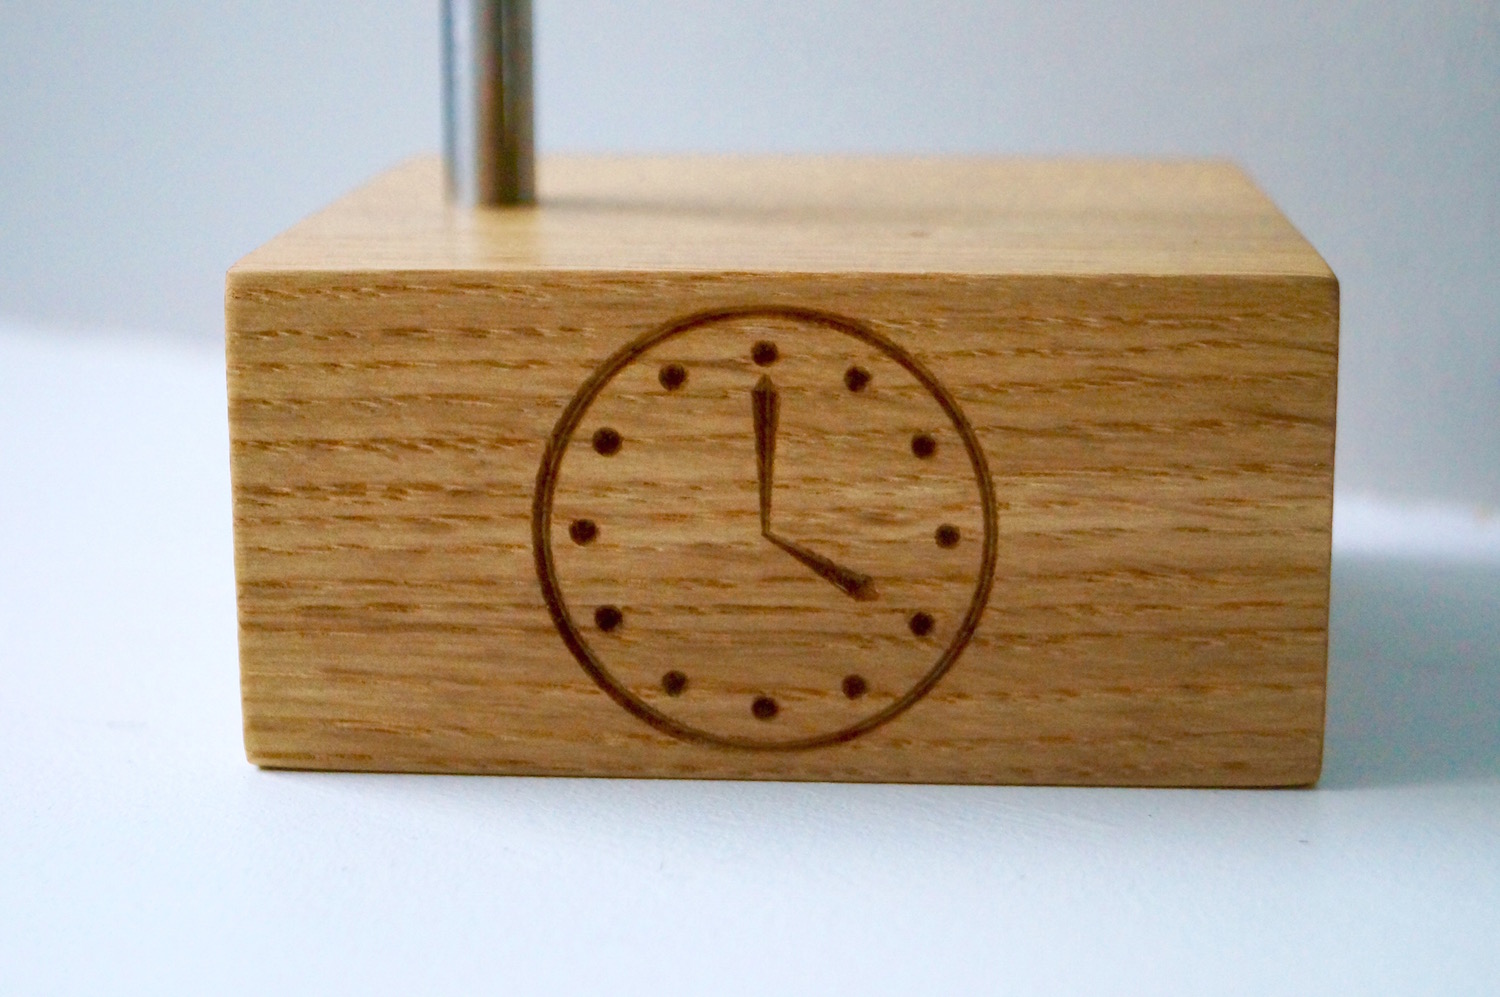 personalised-oak-watch-stand-makemesomethingspecial.com